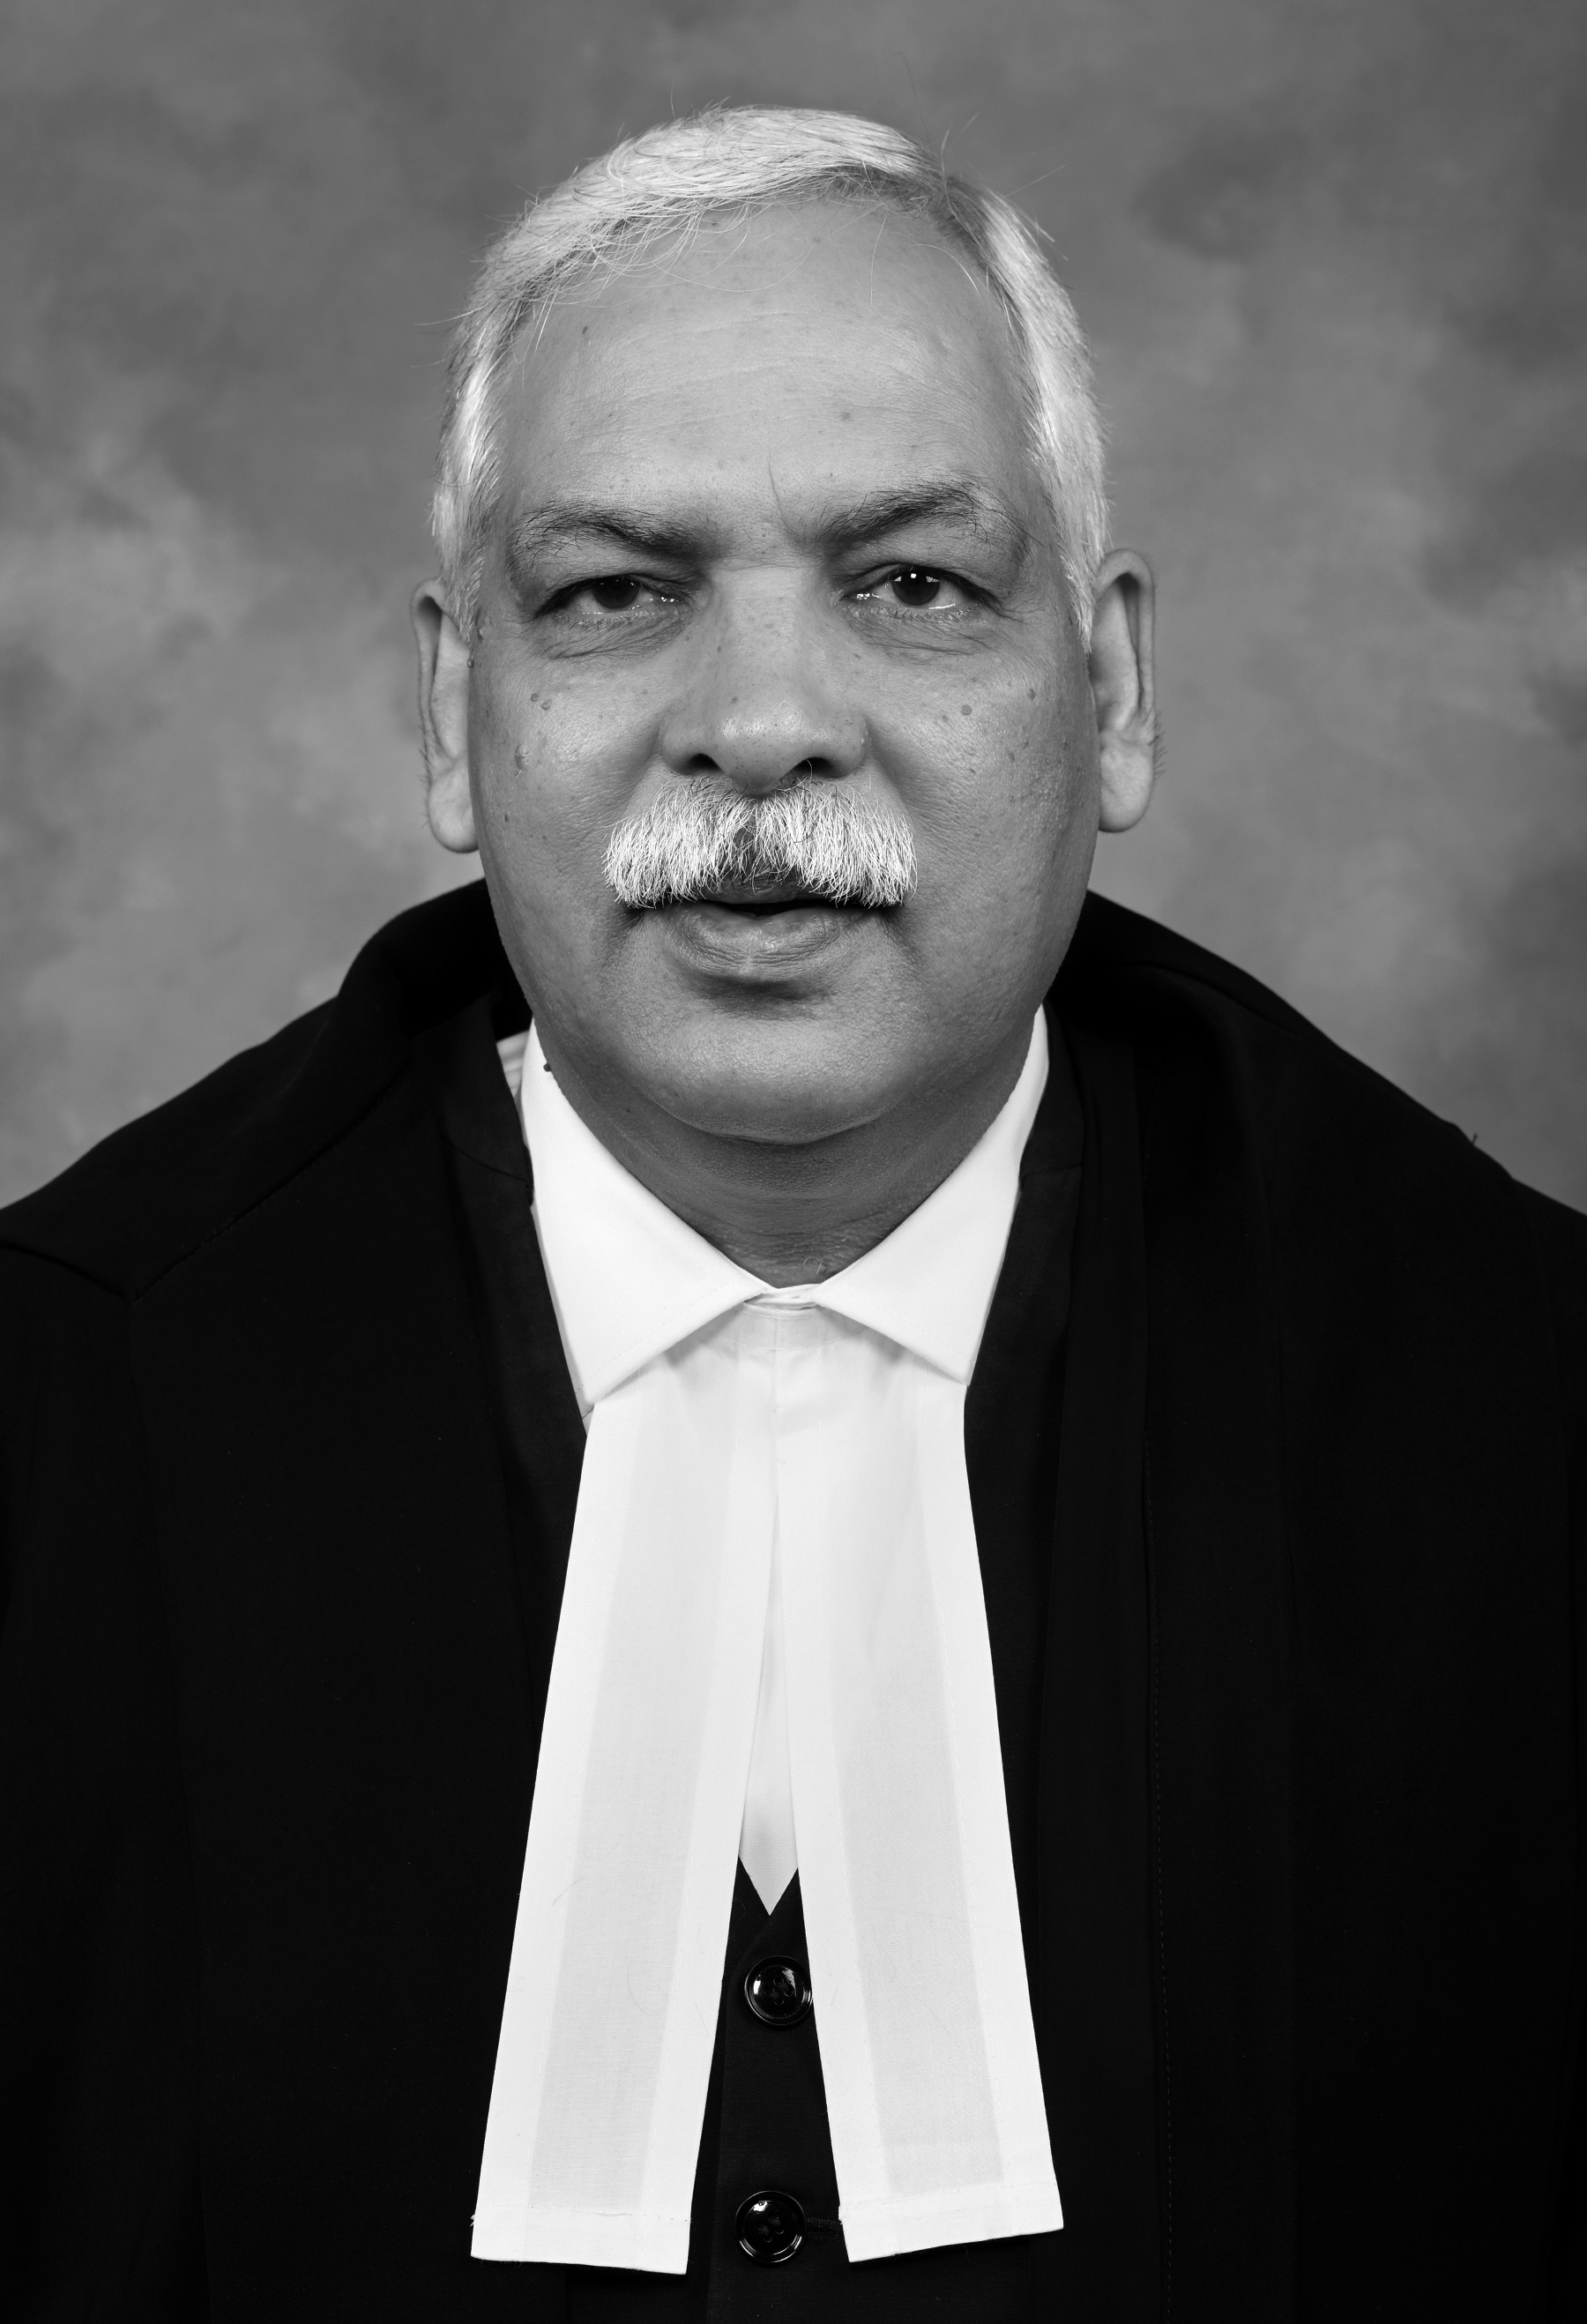 Chief Justice of Bombay High Court